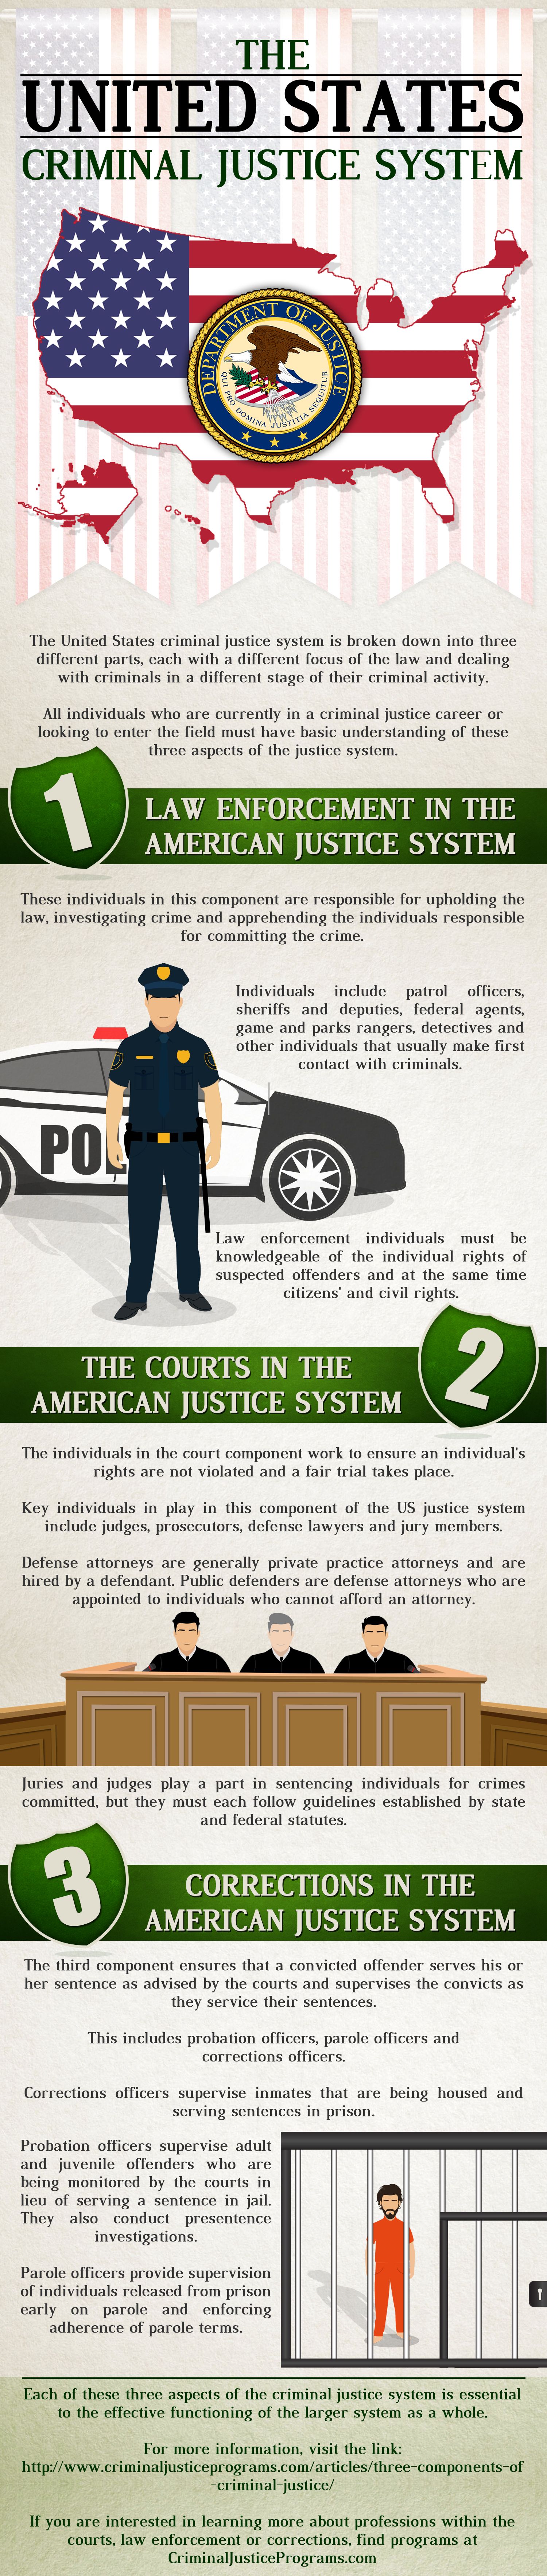 3 Parts of the US Criminal Justice System - Explained